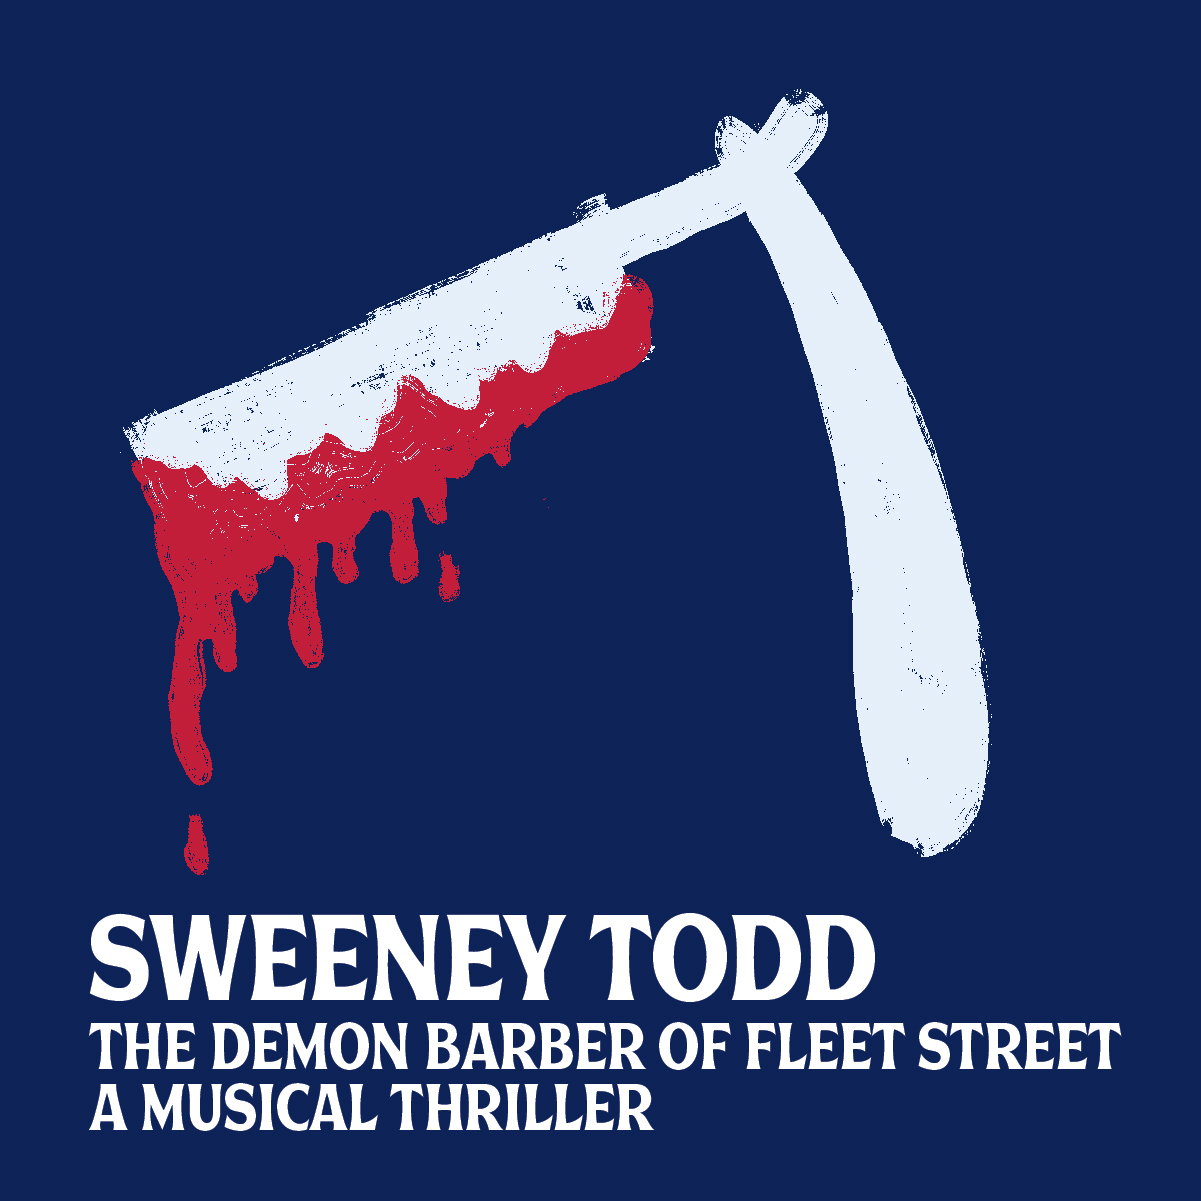 'Sweeney Todd: The Demon Barber of Fleet Street, A Musical Thriller' logo with bloody blade as logo